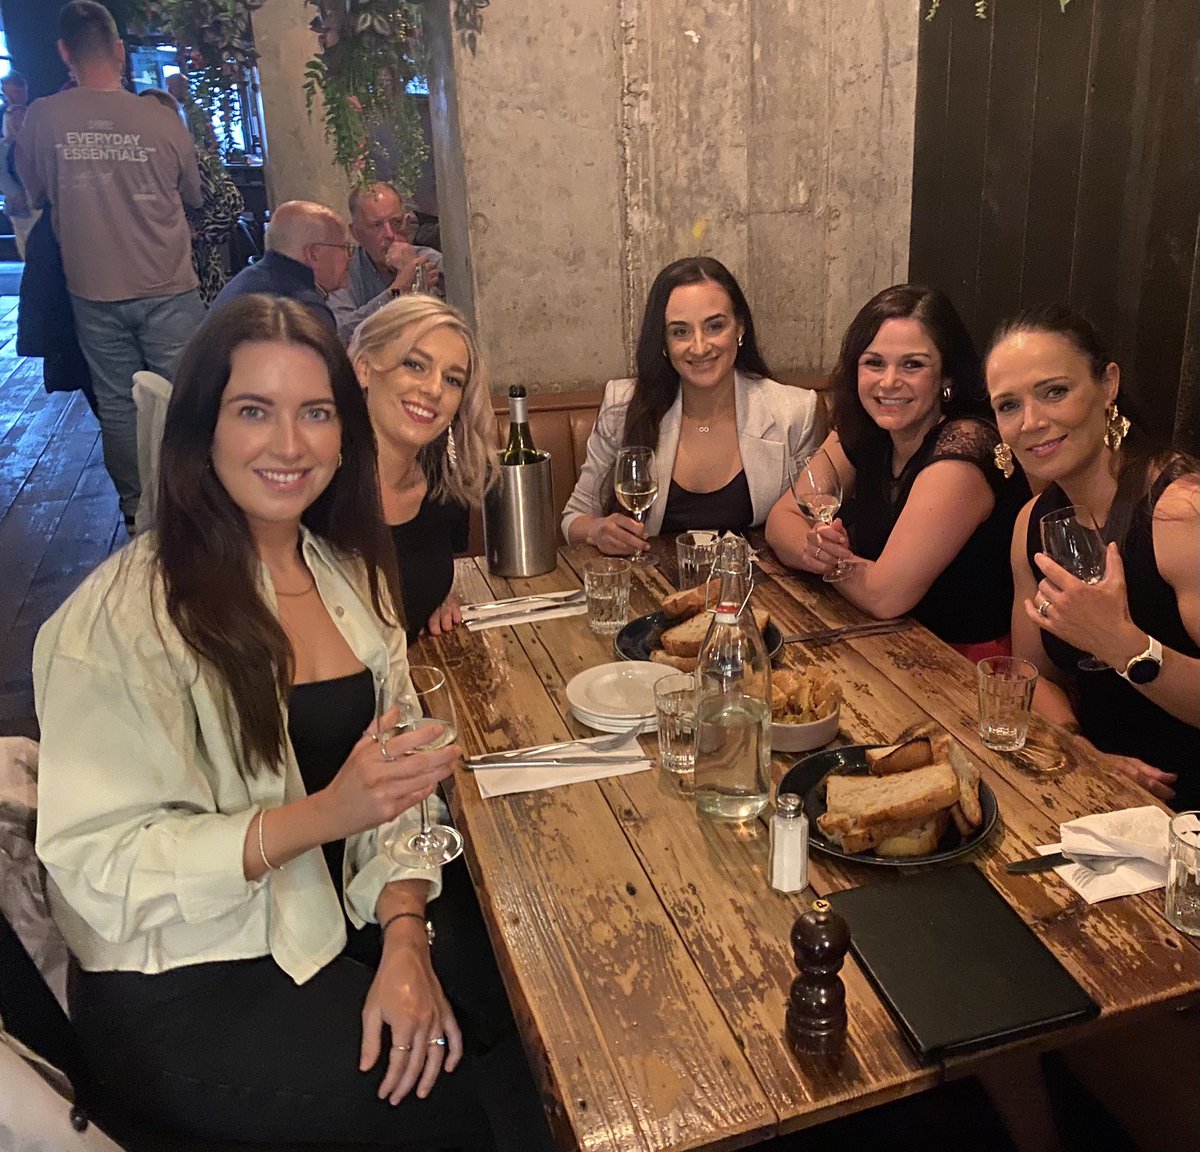 What a bunch of ladies to have through the difficult times….even better when we are celebrating!! #friendsforlife #thriving